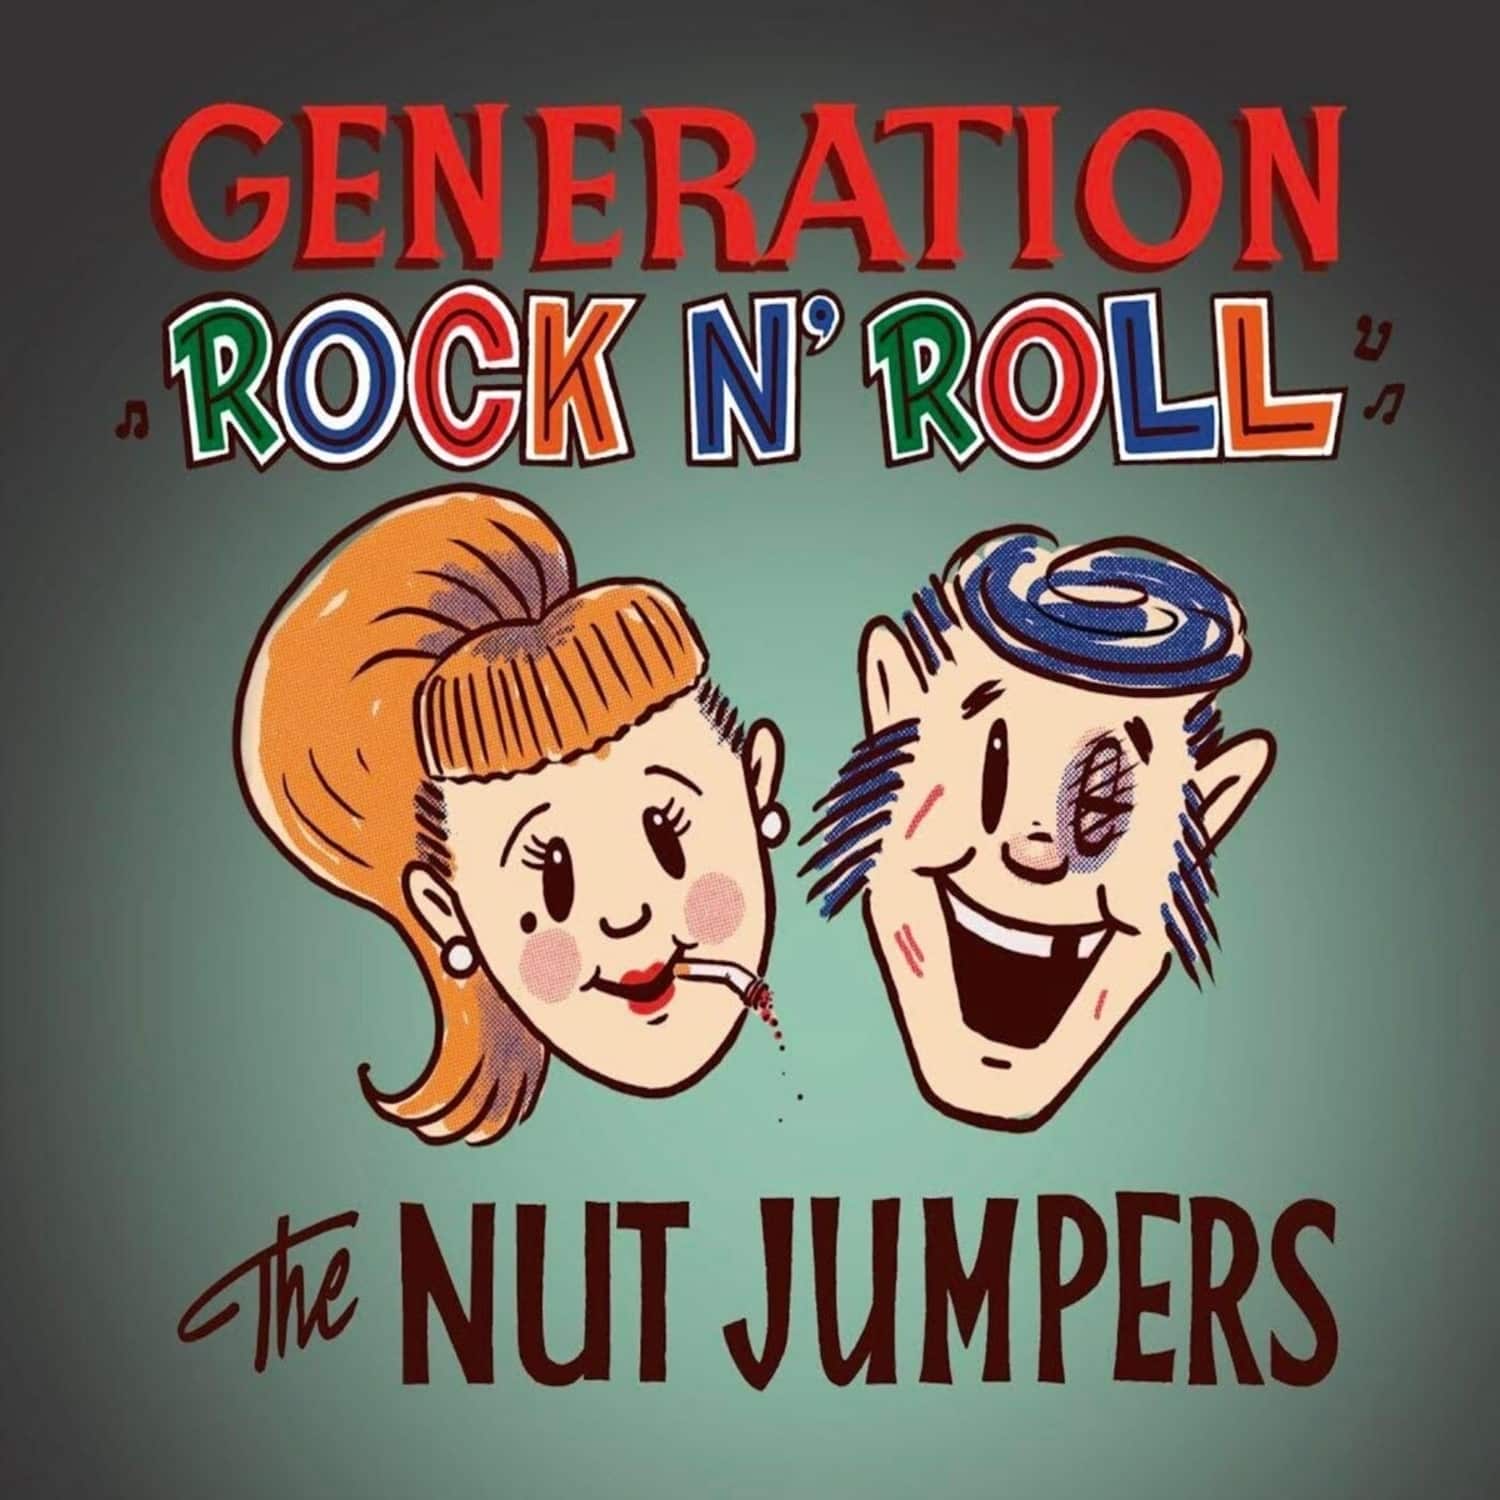 The Nut Jumpers - GENERATION ROCK N ROLL 